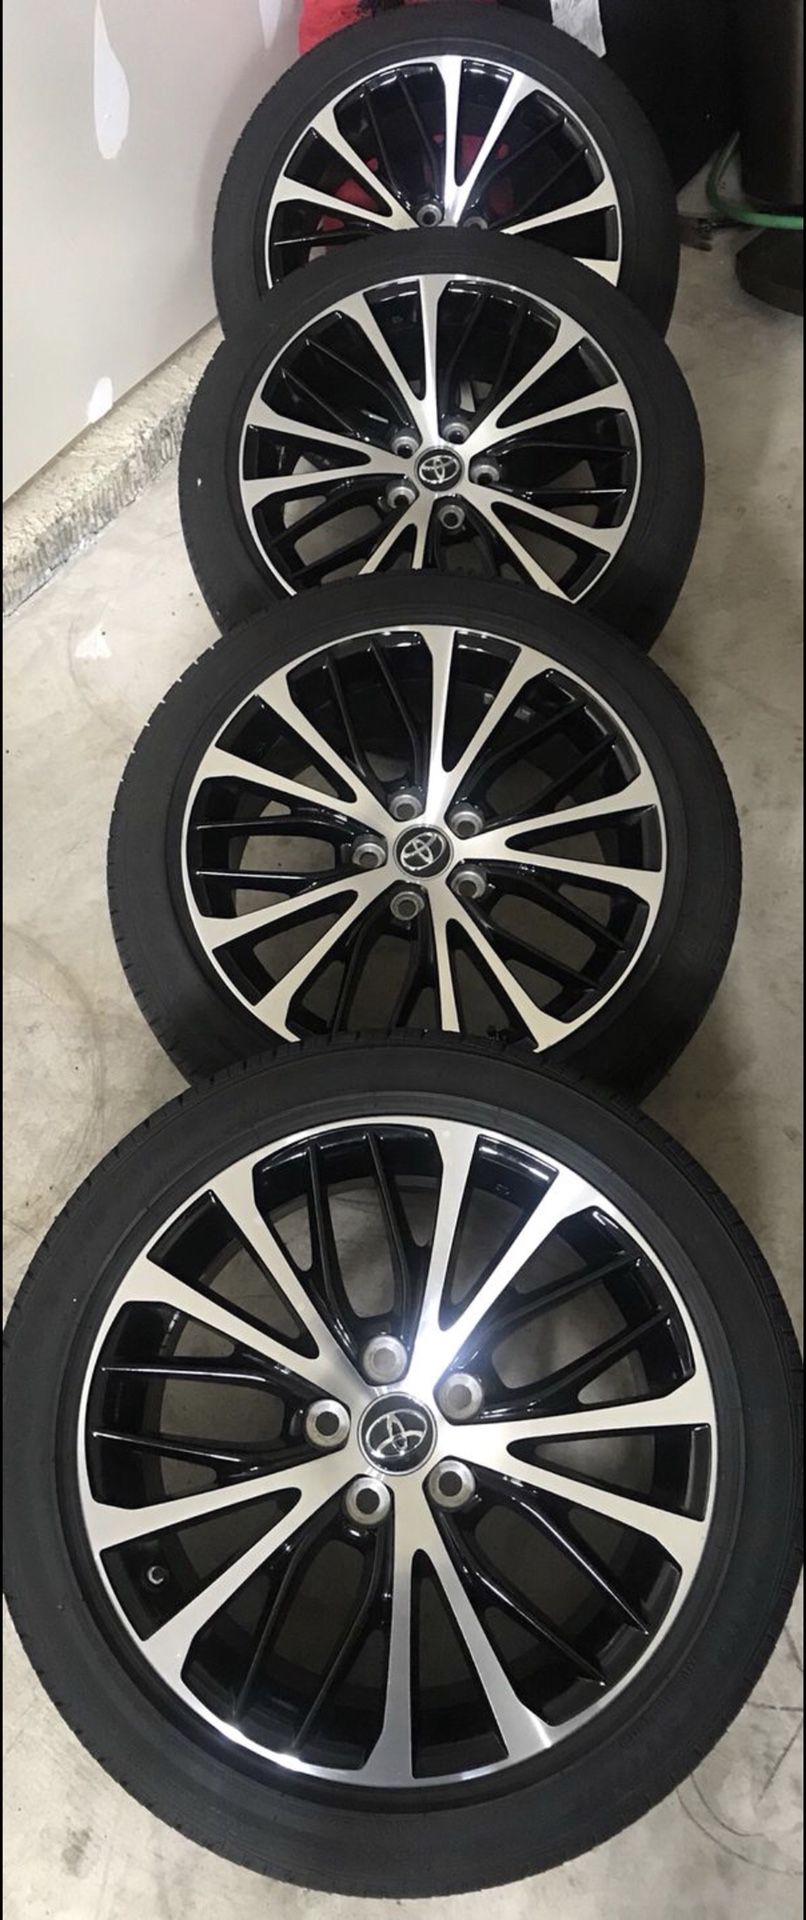 18” Toyota OEM rims and tires